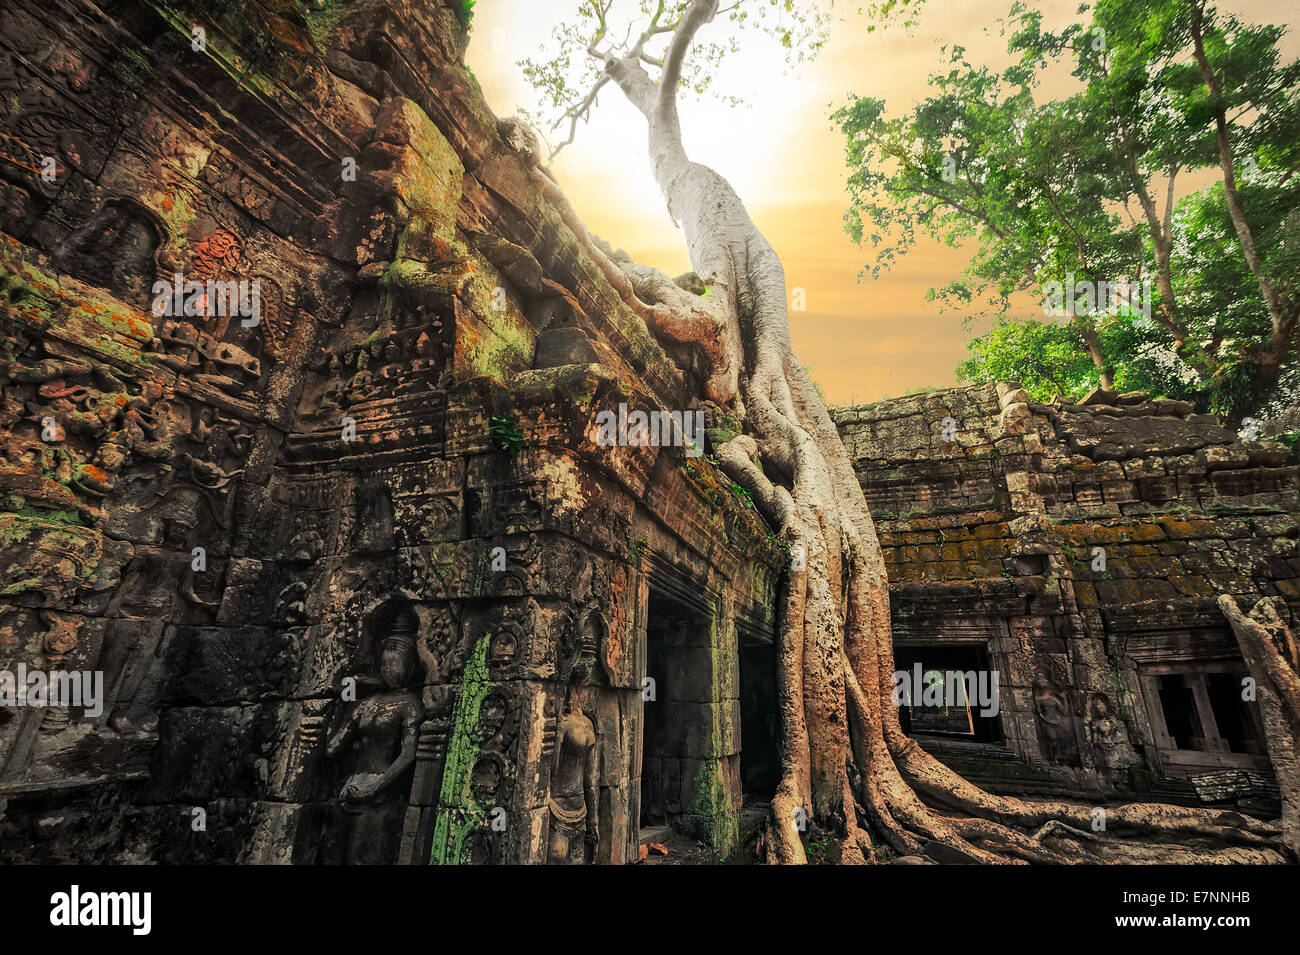 Ancient Khmer architecture. Ta Prohm temple with giant banyan tree at sunset. Angkor Wat complex, Siem Reap, Cambodia travel des Stock Photo